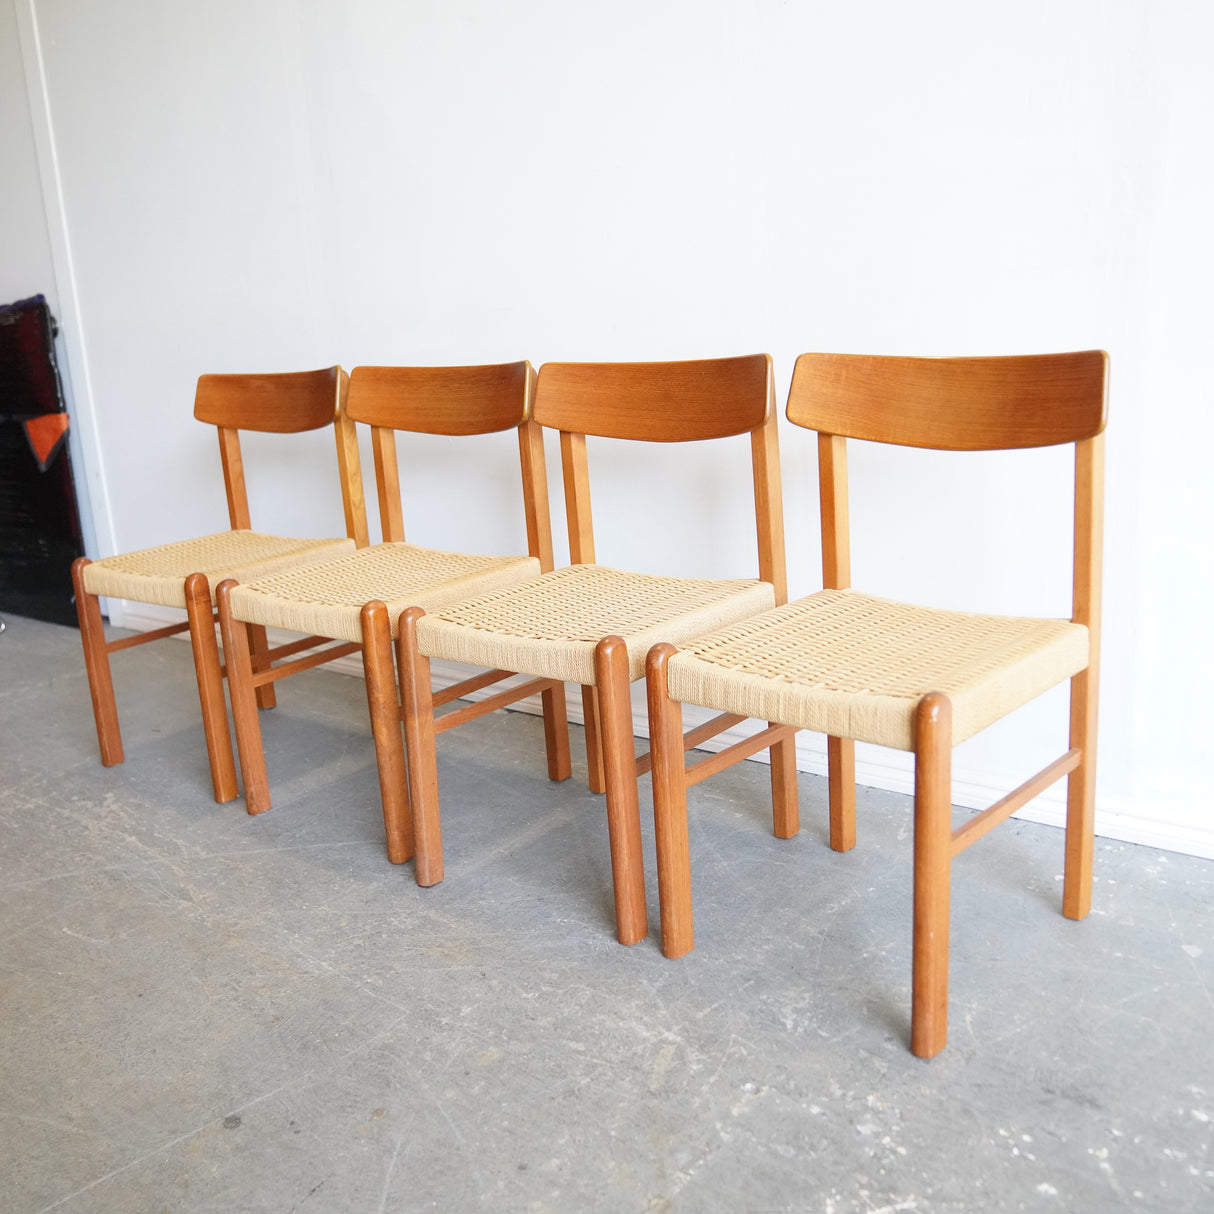 Set of Four Vintage Danish Modern Style Dining Chairs, circa 1980s